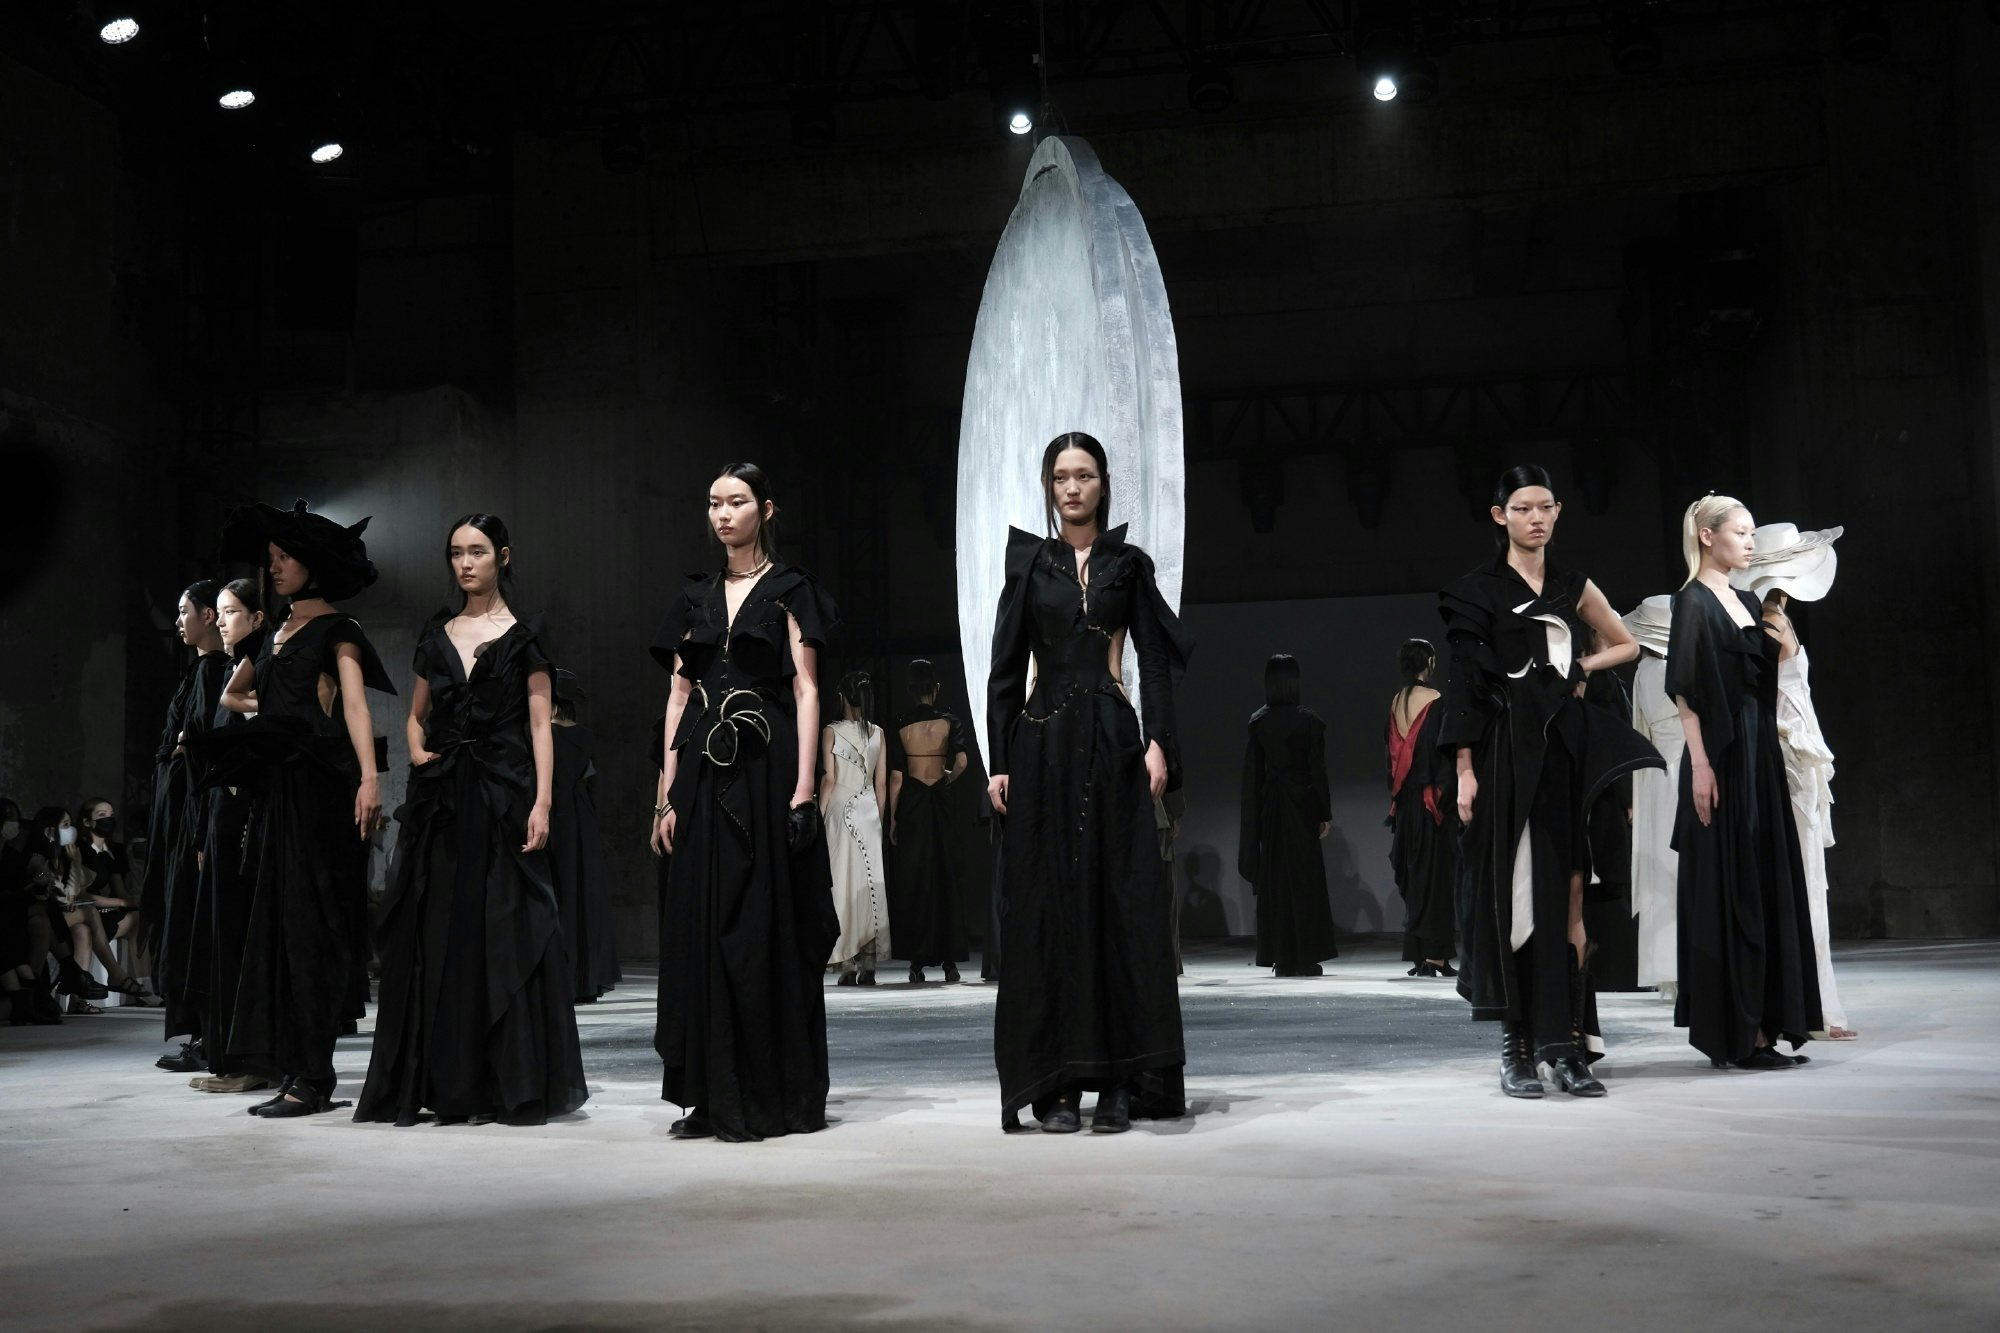 The Yehuafan collection staged at Shanghai Fashion Week featured the work of architect Louis Isadore Kahn. Photo: Yehuafan